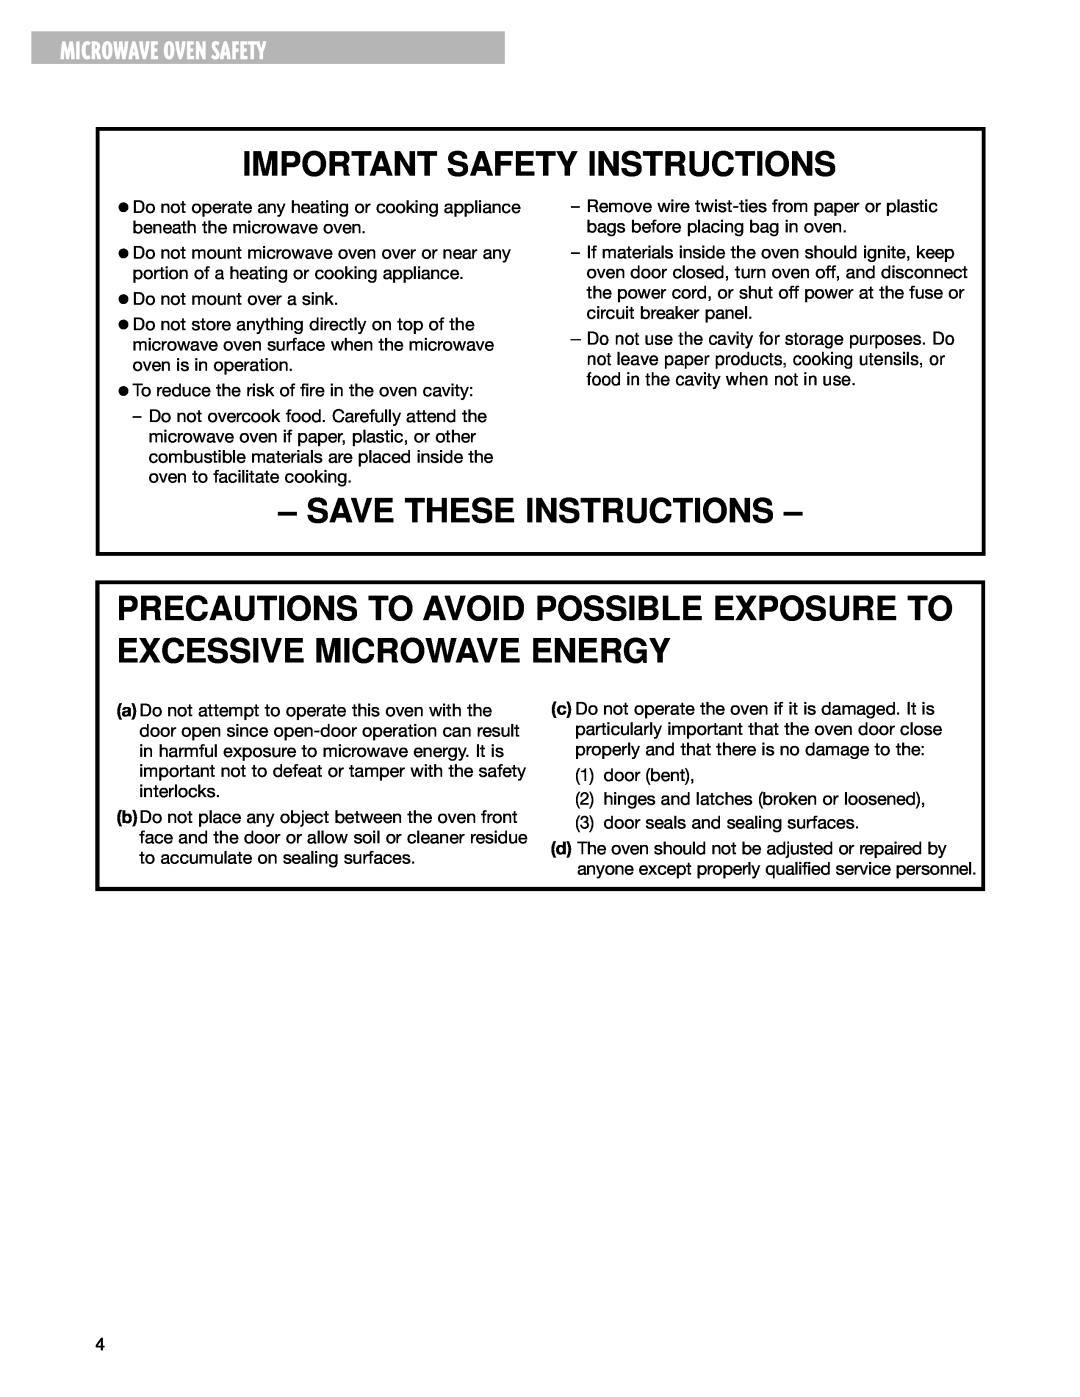 Whirlpool MT1151SG Precautions To Avoid Possible Exposure To Excessive Microwave Energy, Important Safety Instructions 